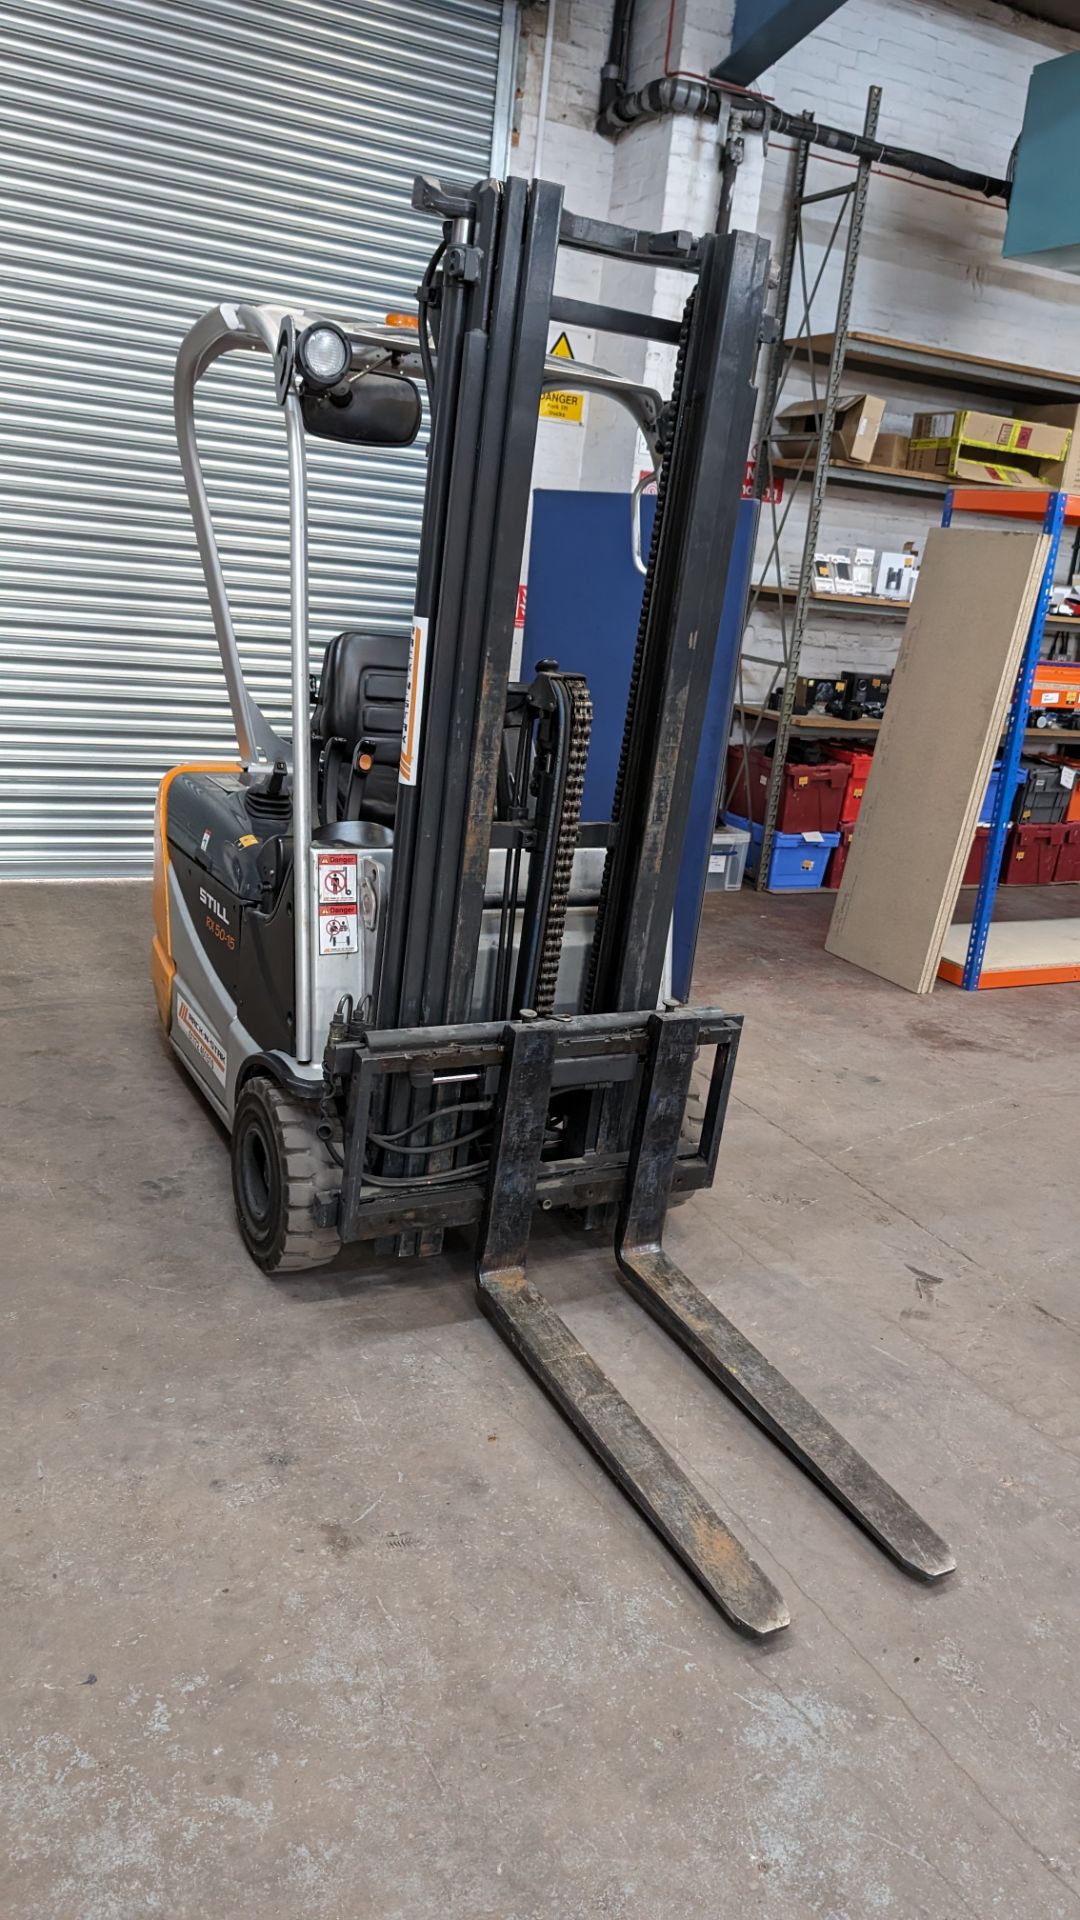 Still model RX-5015 3-wheel electric forklift truck with sideshift, 1.5 tonne capacity, including St - Image 11 of 18